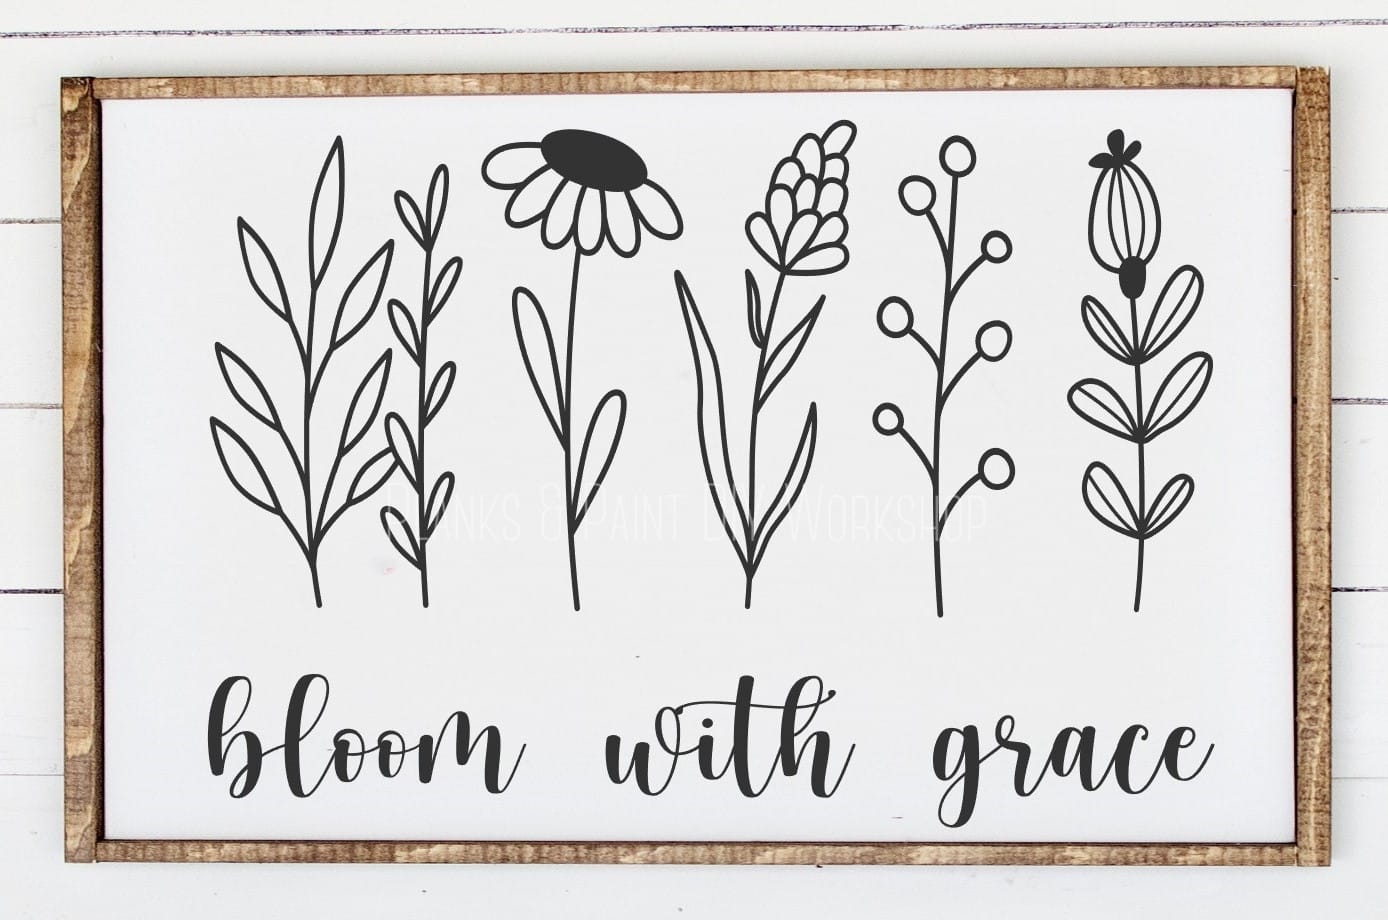 Bloom With Grace